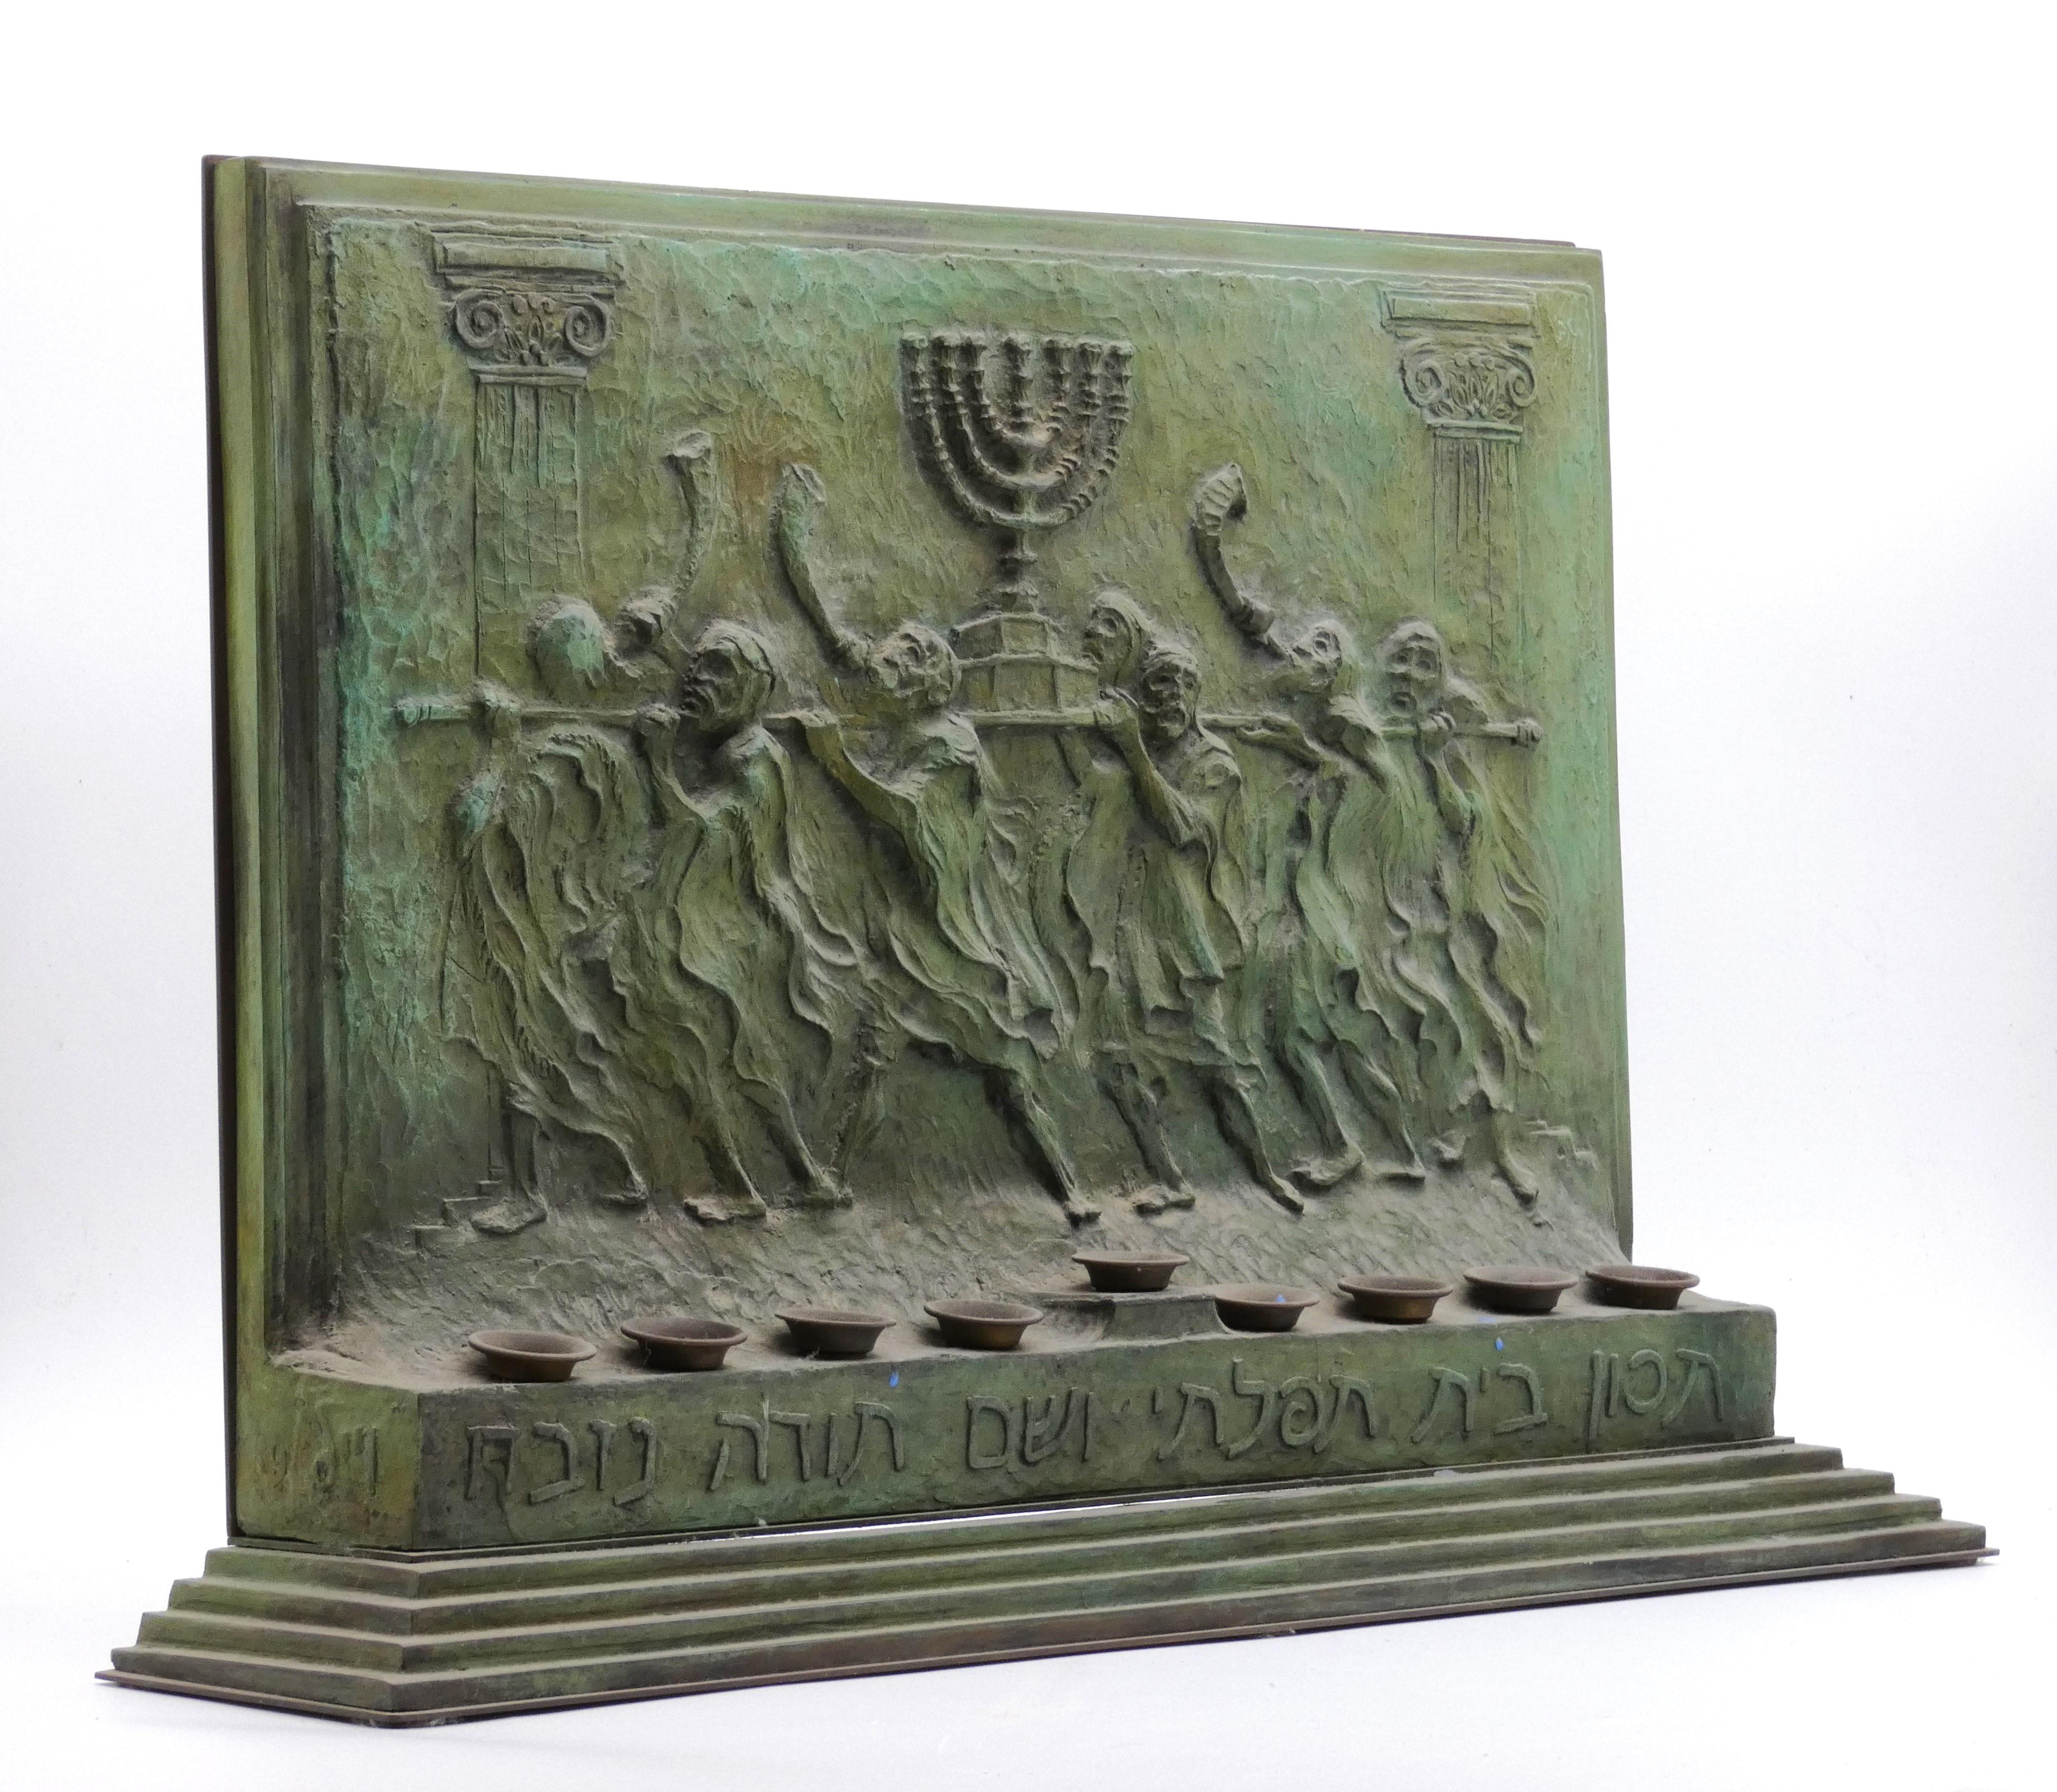 This Hanukkah lamp sculpture is truly spectacular with its artistic realism and graphic detailing on its front main body.

Displayed at front is the scene of the Jewish people returning to Israel with  Holy Menorah used in the ancient times of the